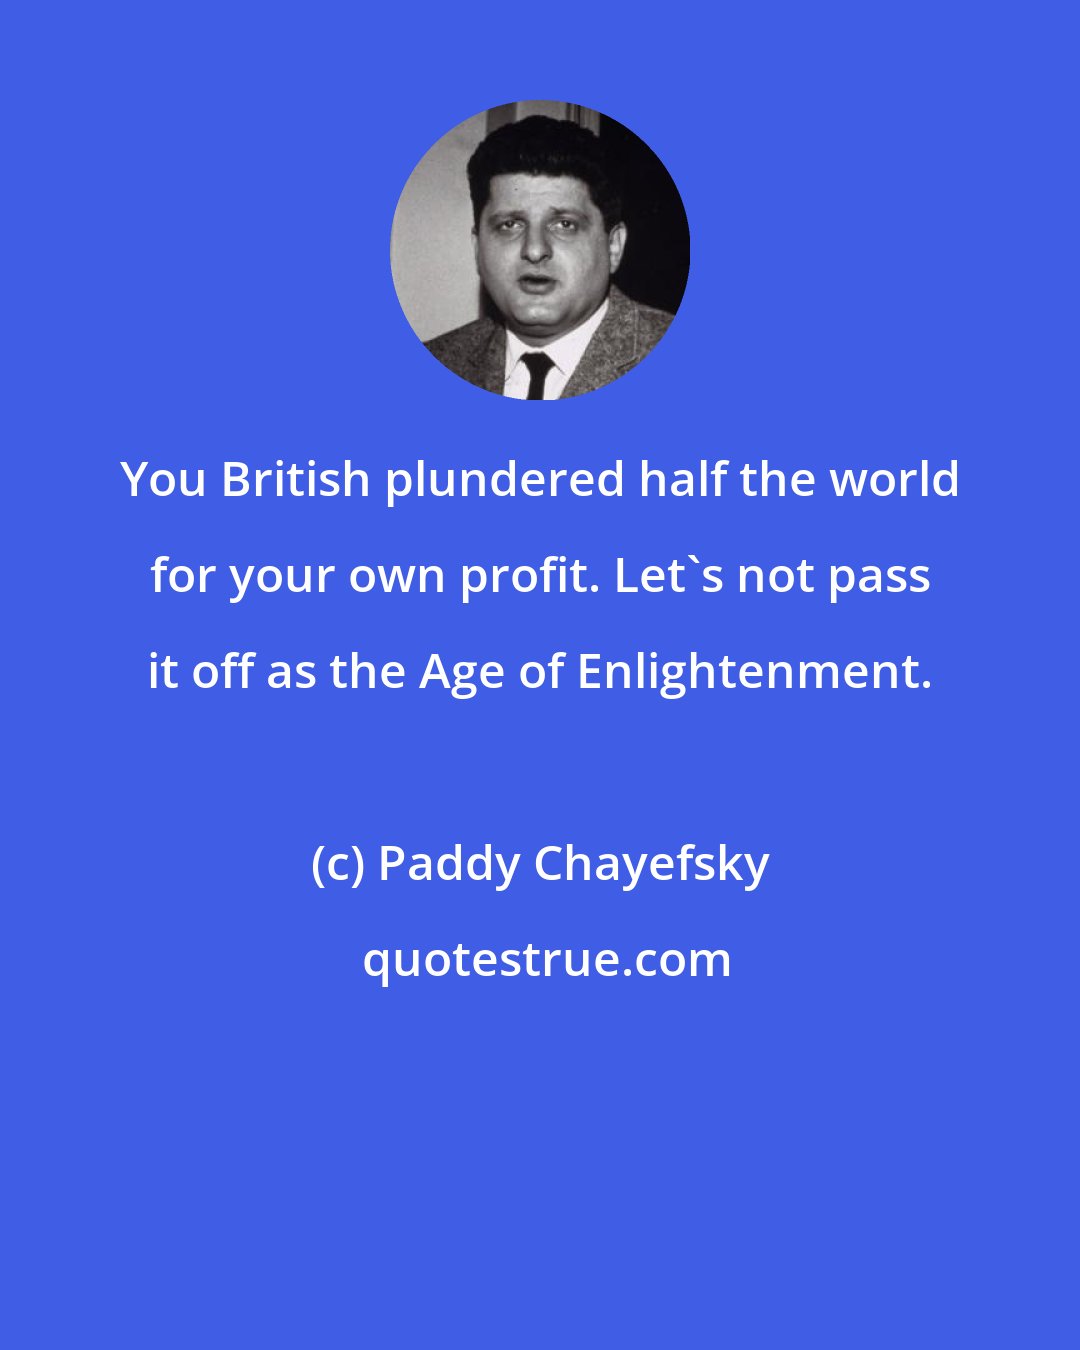 Paddy Chayefsky: You British plundered half the world for your own profit. Let's not pass it off as the Age of Enlightenment.